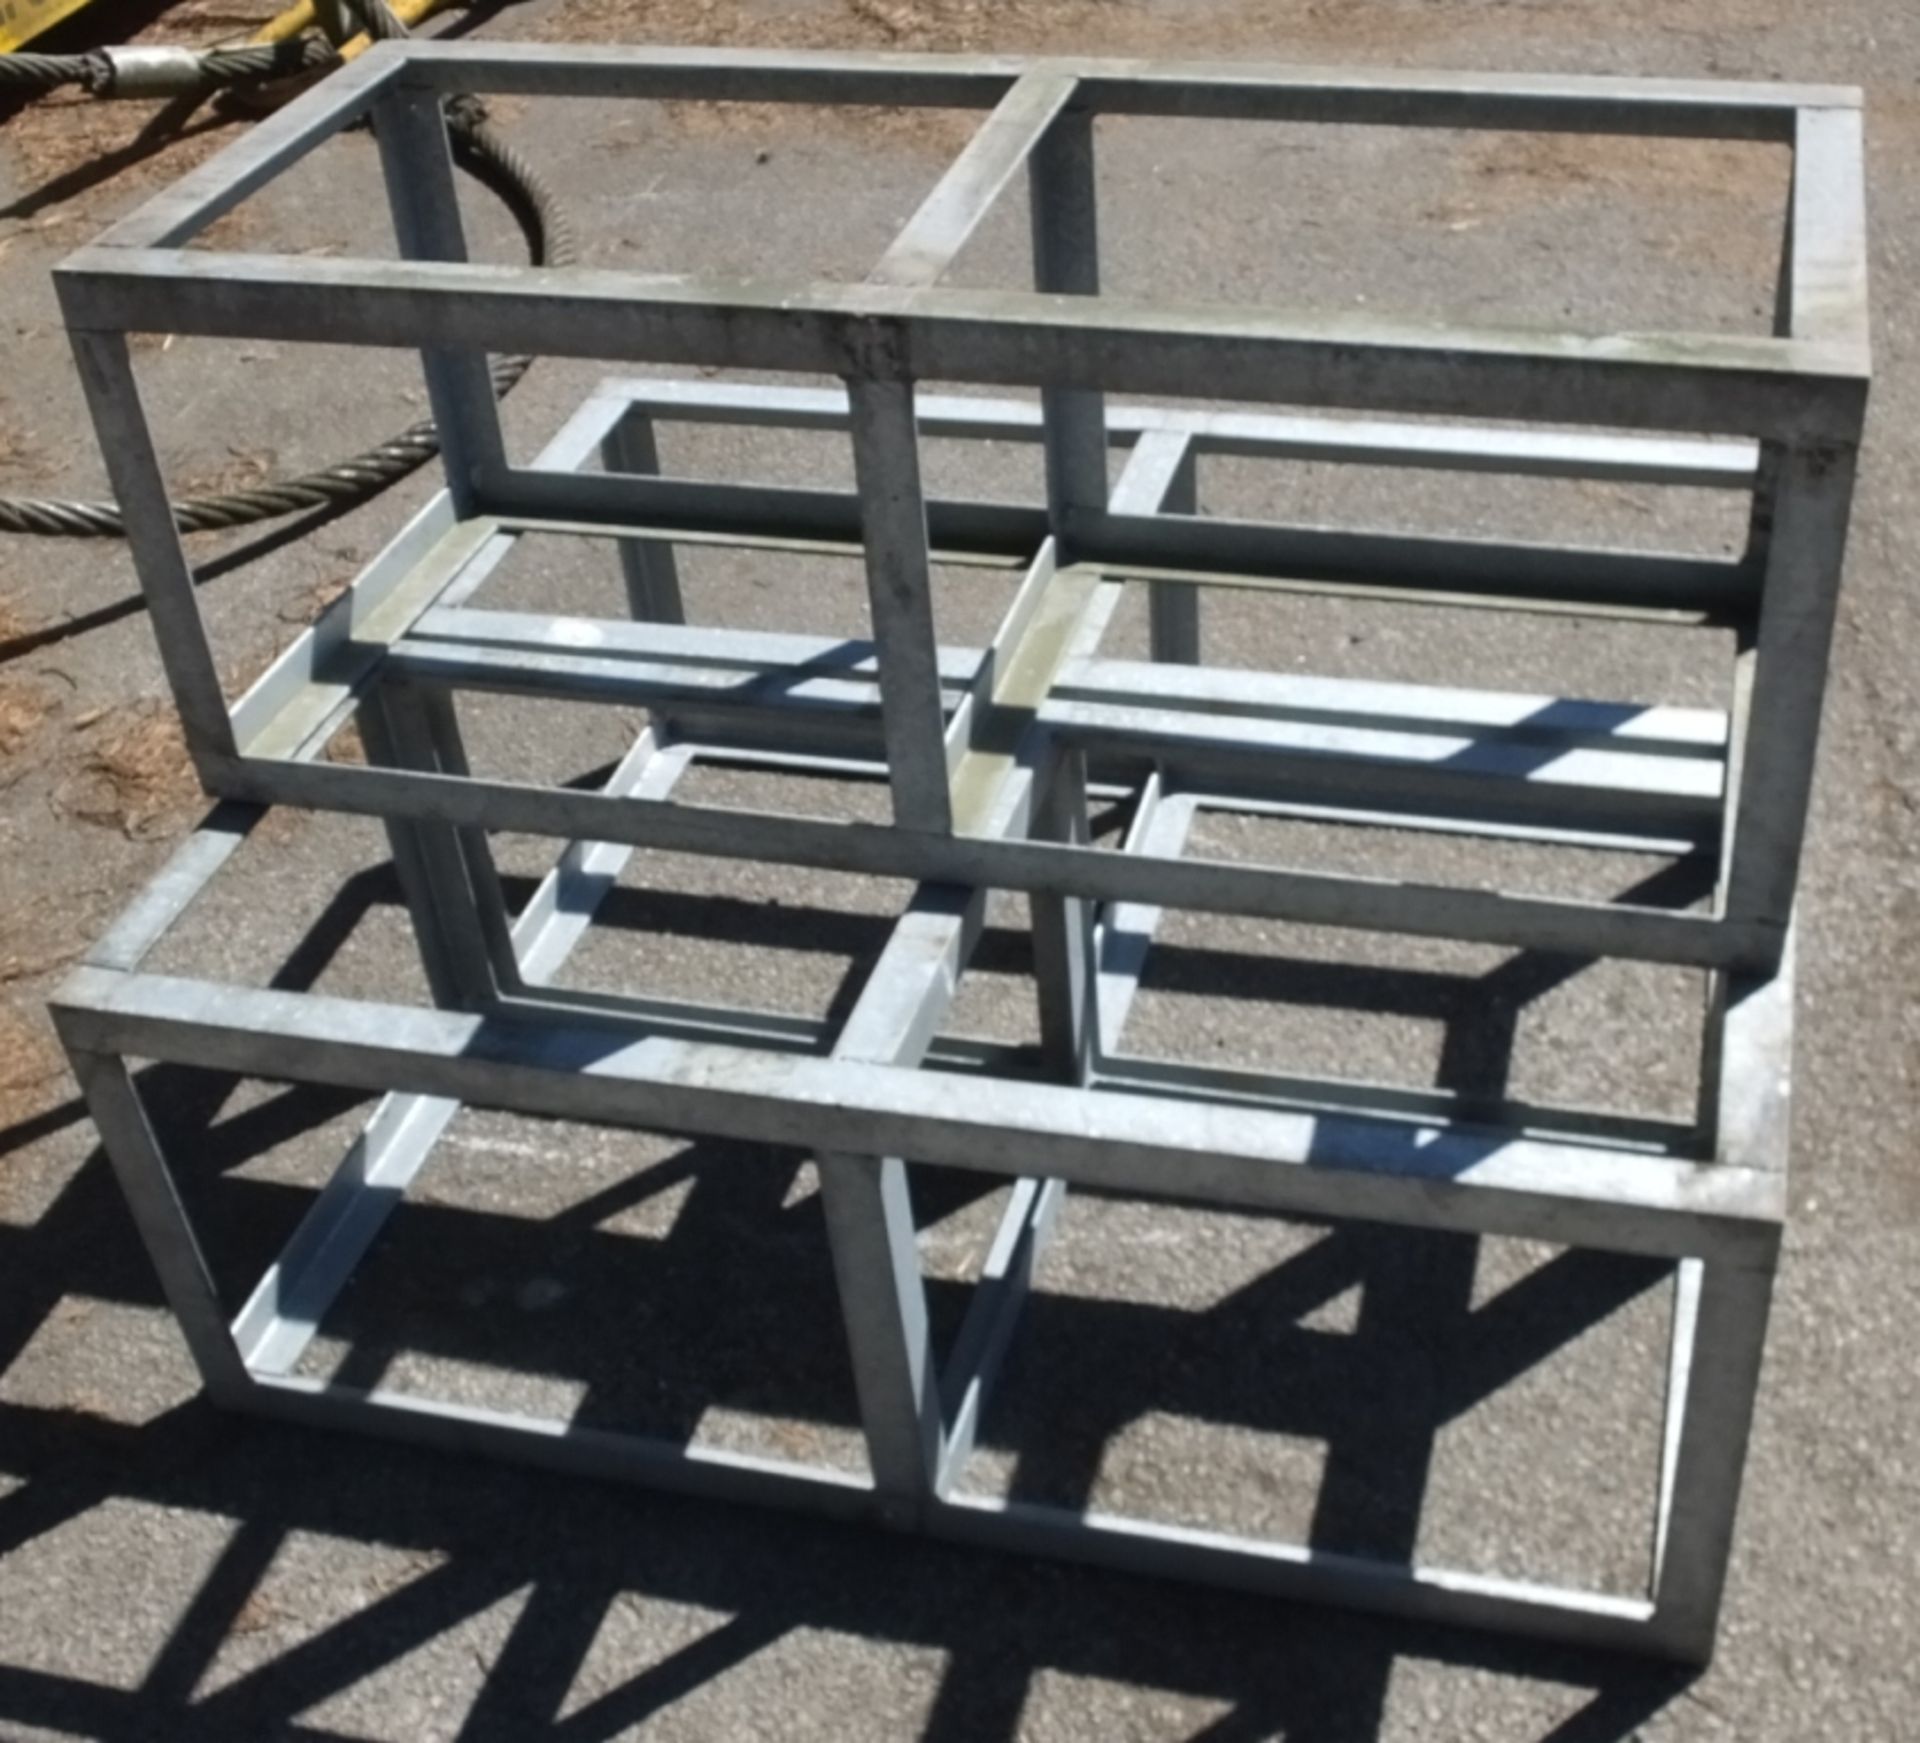 3x Galvinised Angle Iron Stands - 1190 x 450 x 400